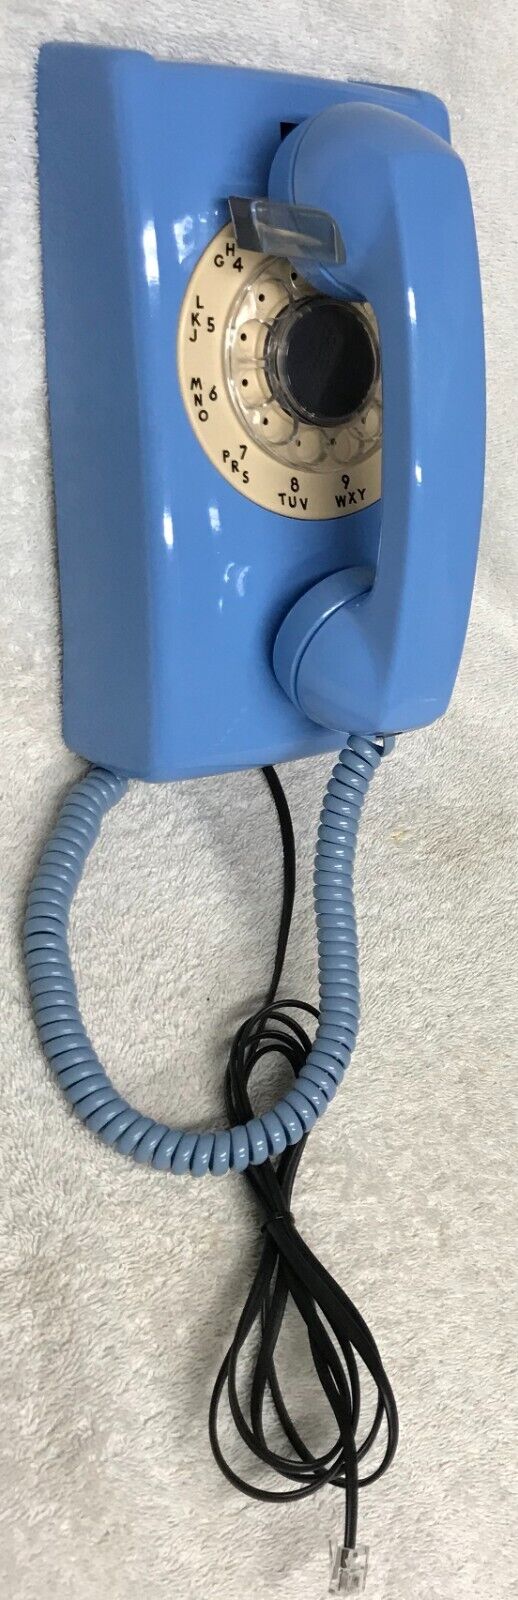 Vintage 1970s WESTERN ELECTRIC A/B 554 ( 3-71 ) BLUE Rotary Wall Mount Telephone